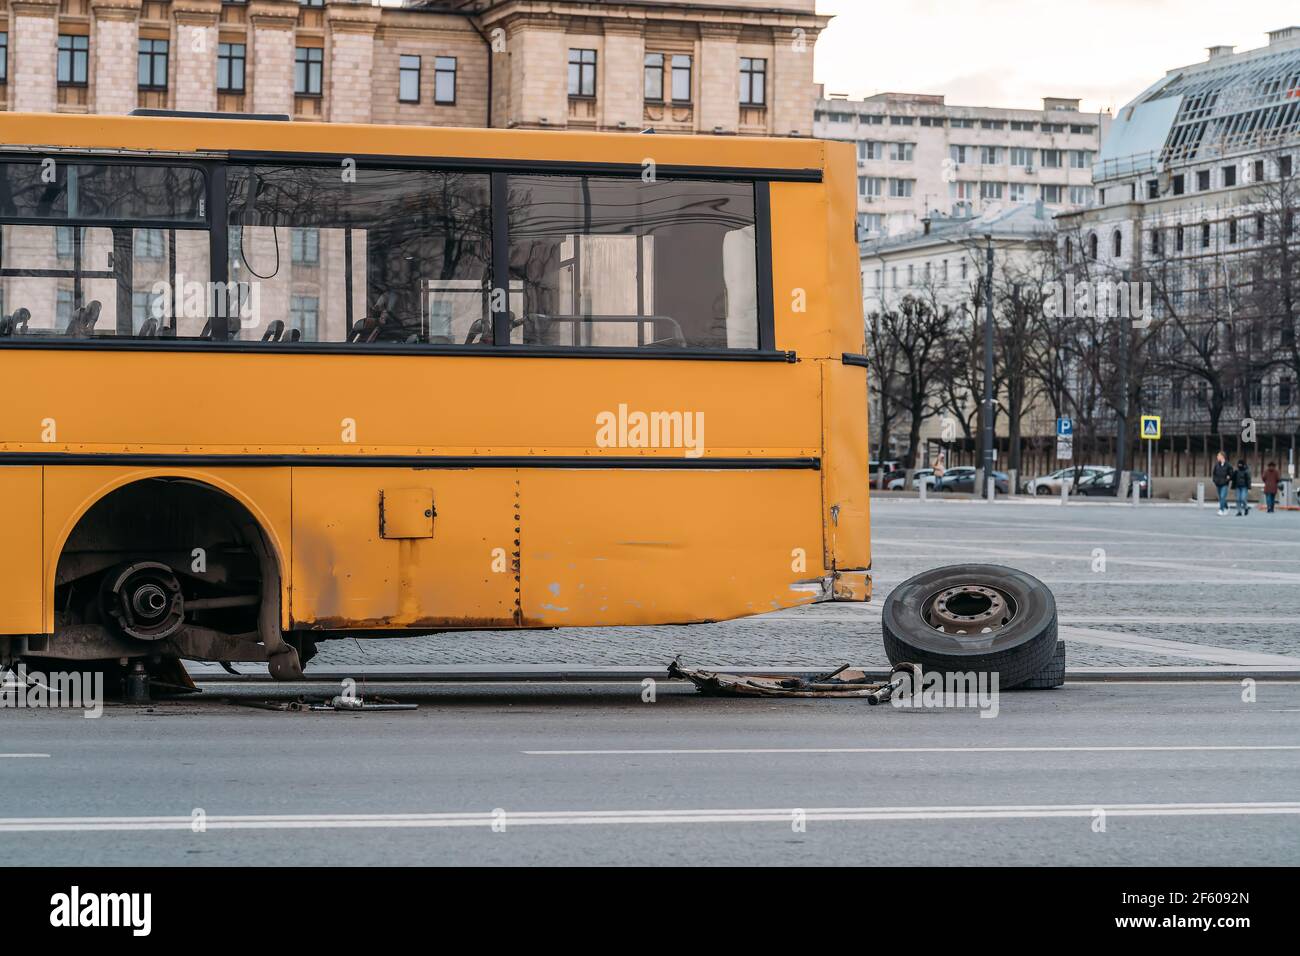 City bus with broken wheel stands on urban road. Stock Photo